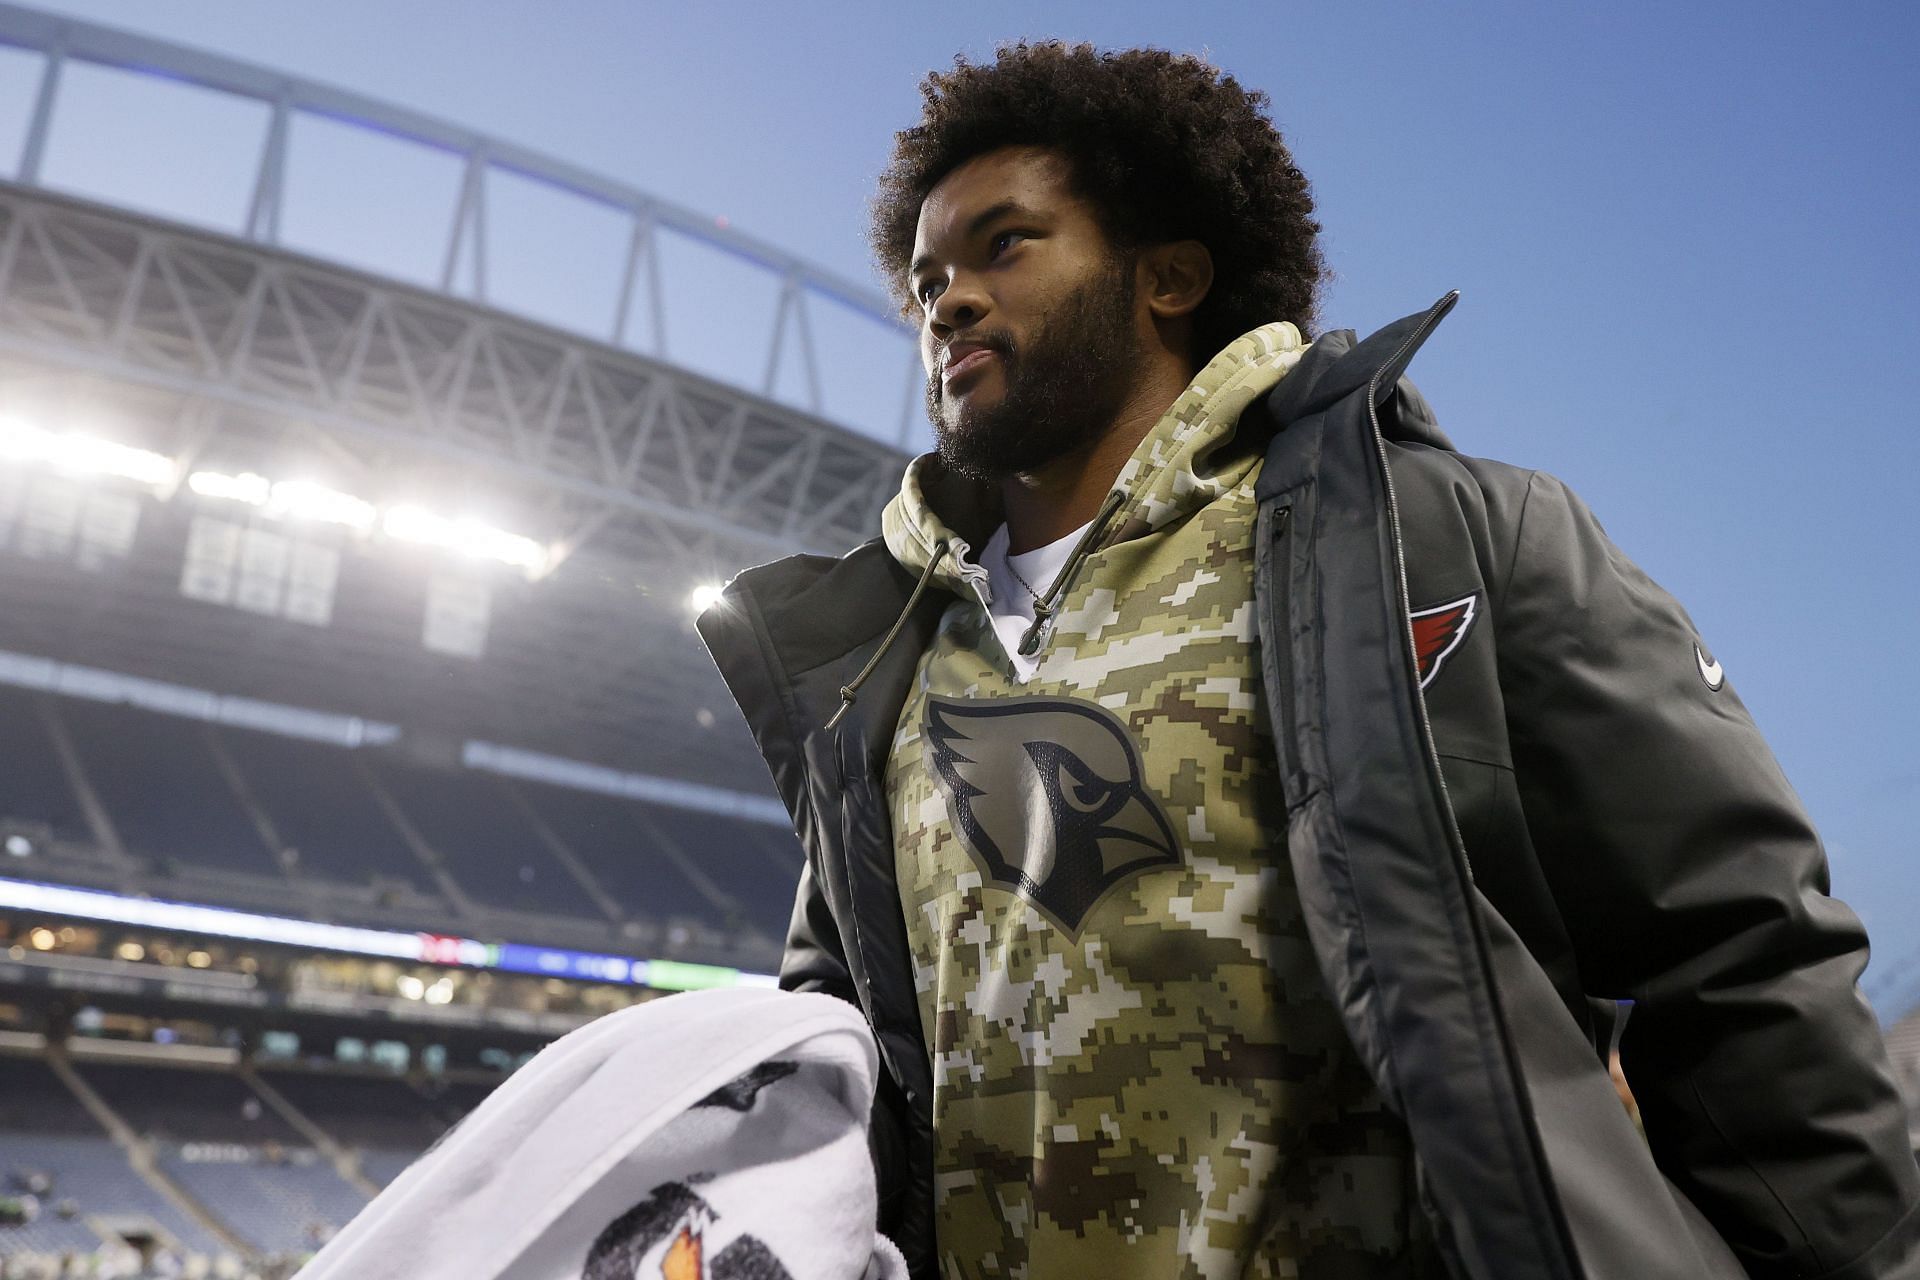 Relegated to street clothes, Murray leaves the field after his Arizona teammates earned a 23-13 win over Seattle last weekend (Photo: Getty)